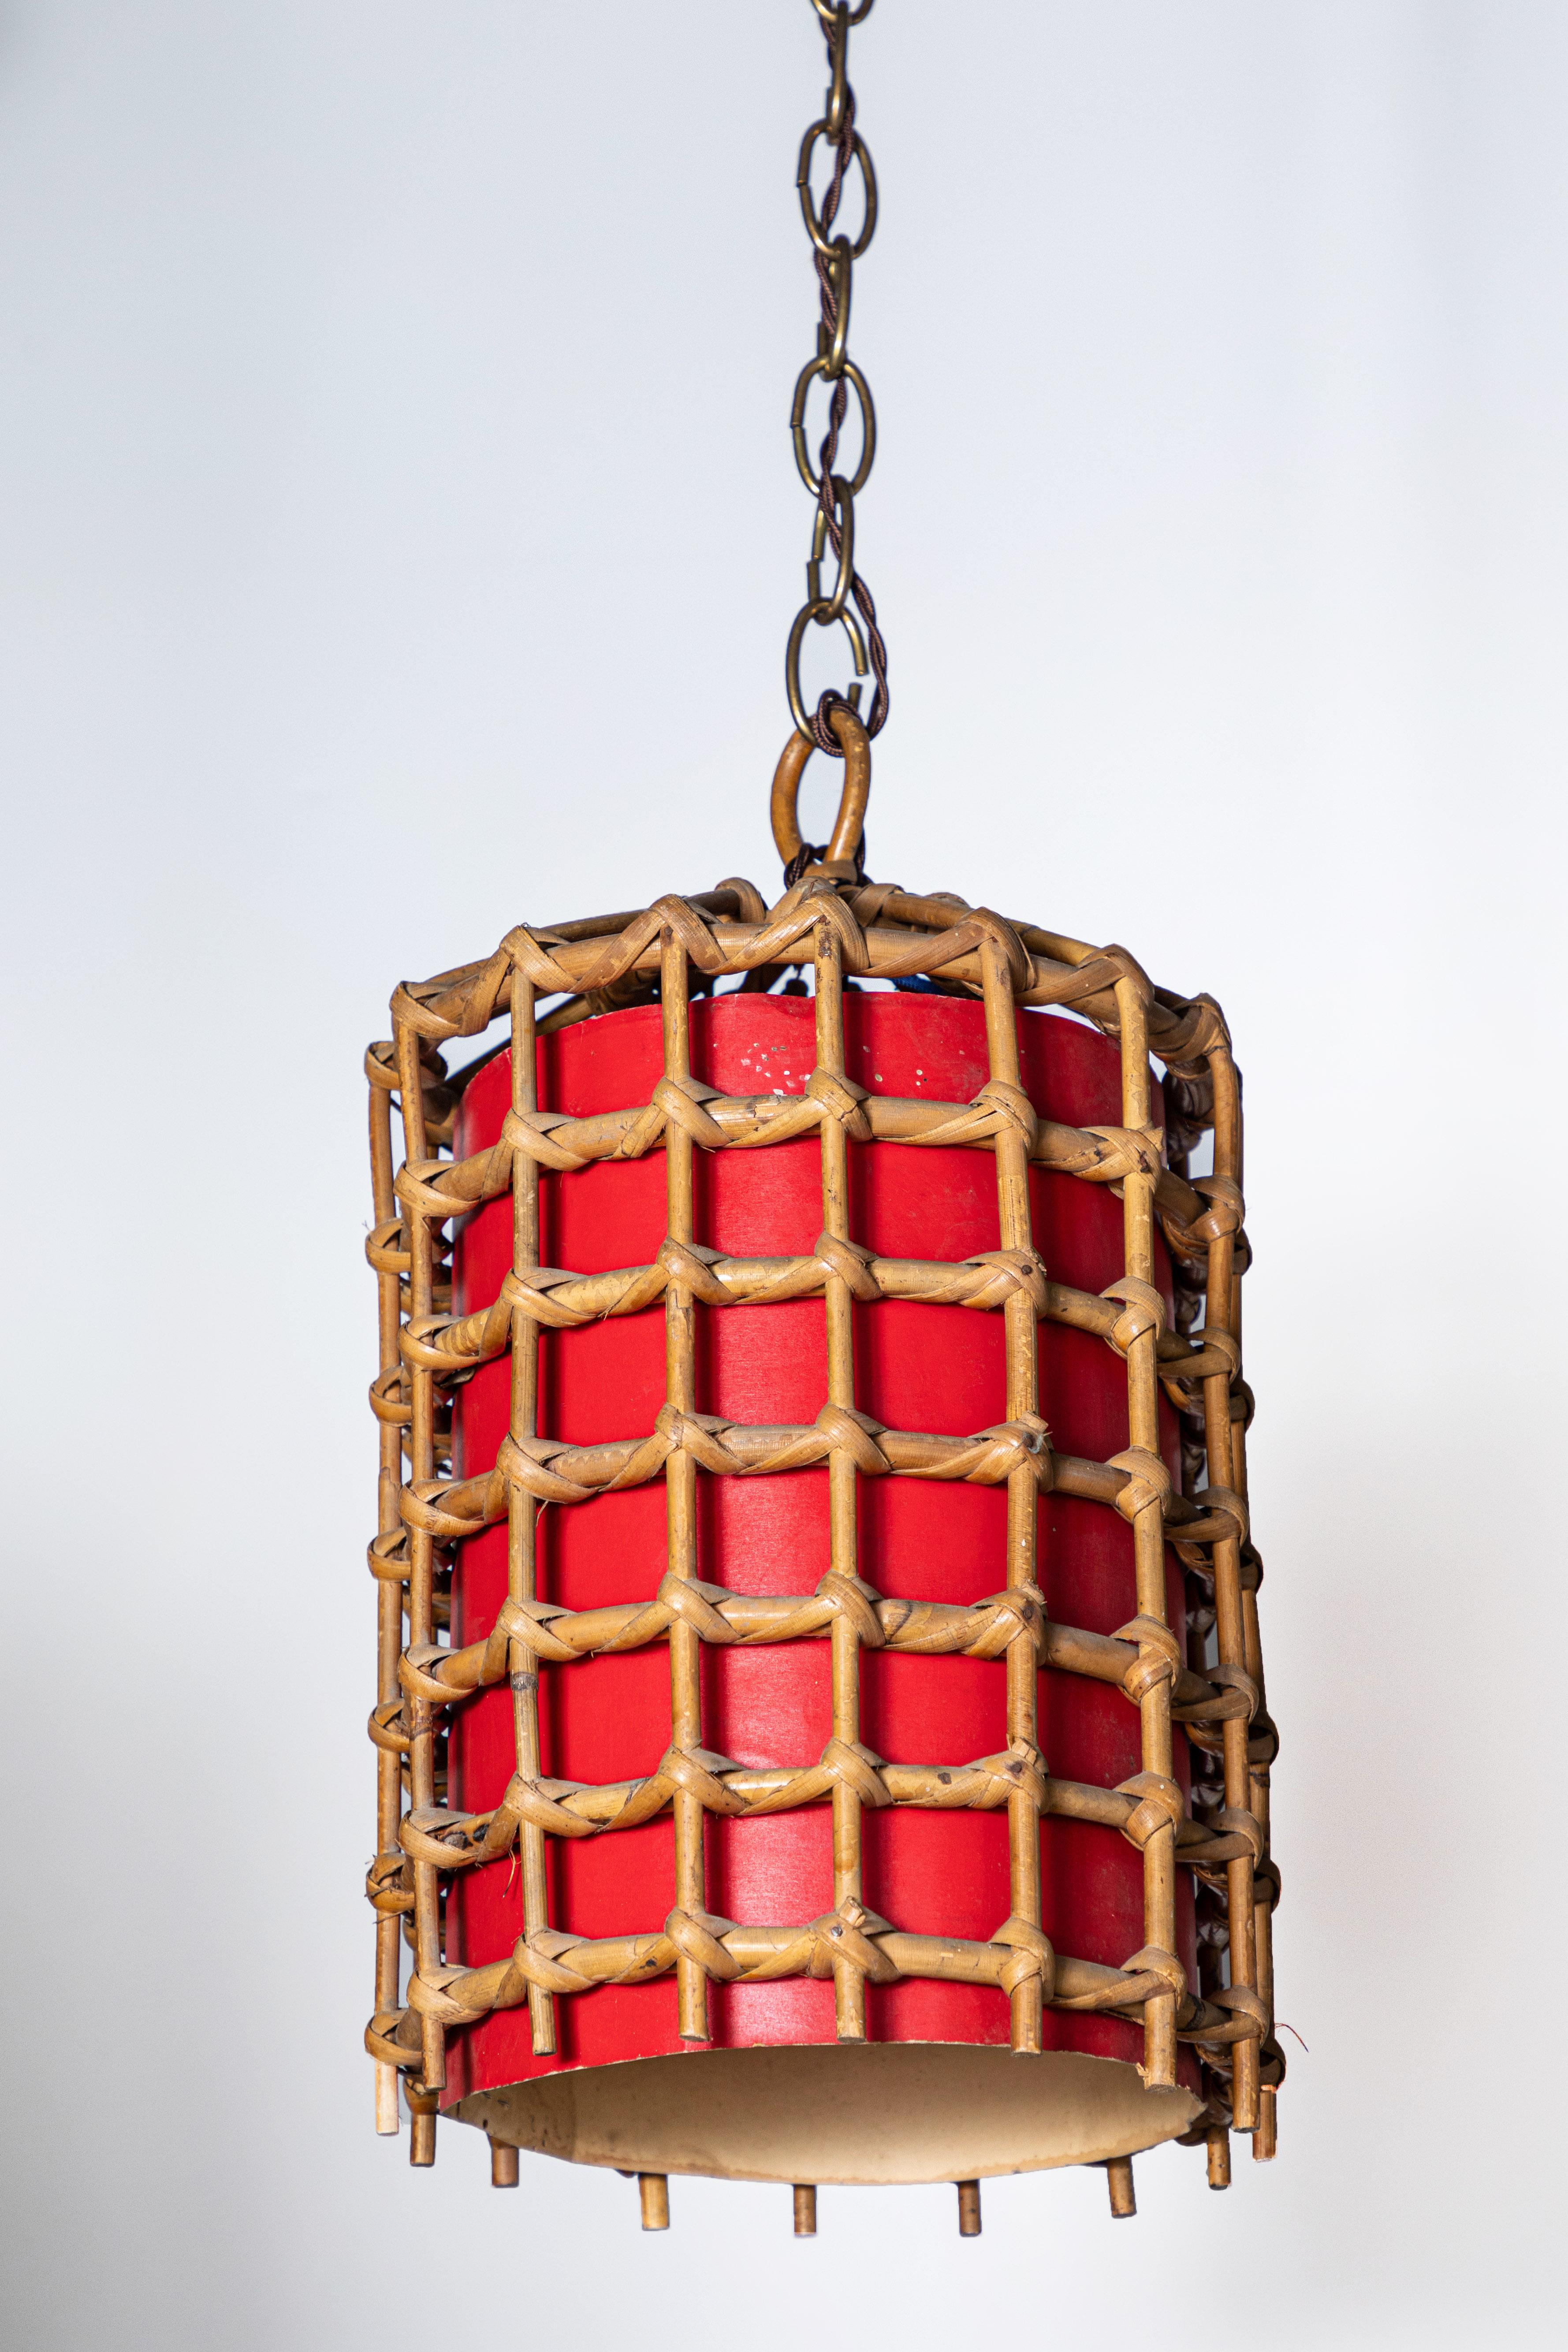 French bamboo lantern pendant with red illuminated paper, antique brass chain and brown twist cord added. The light has been newly wired and comes with a canopy. Lantern alone is 12